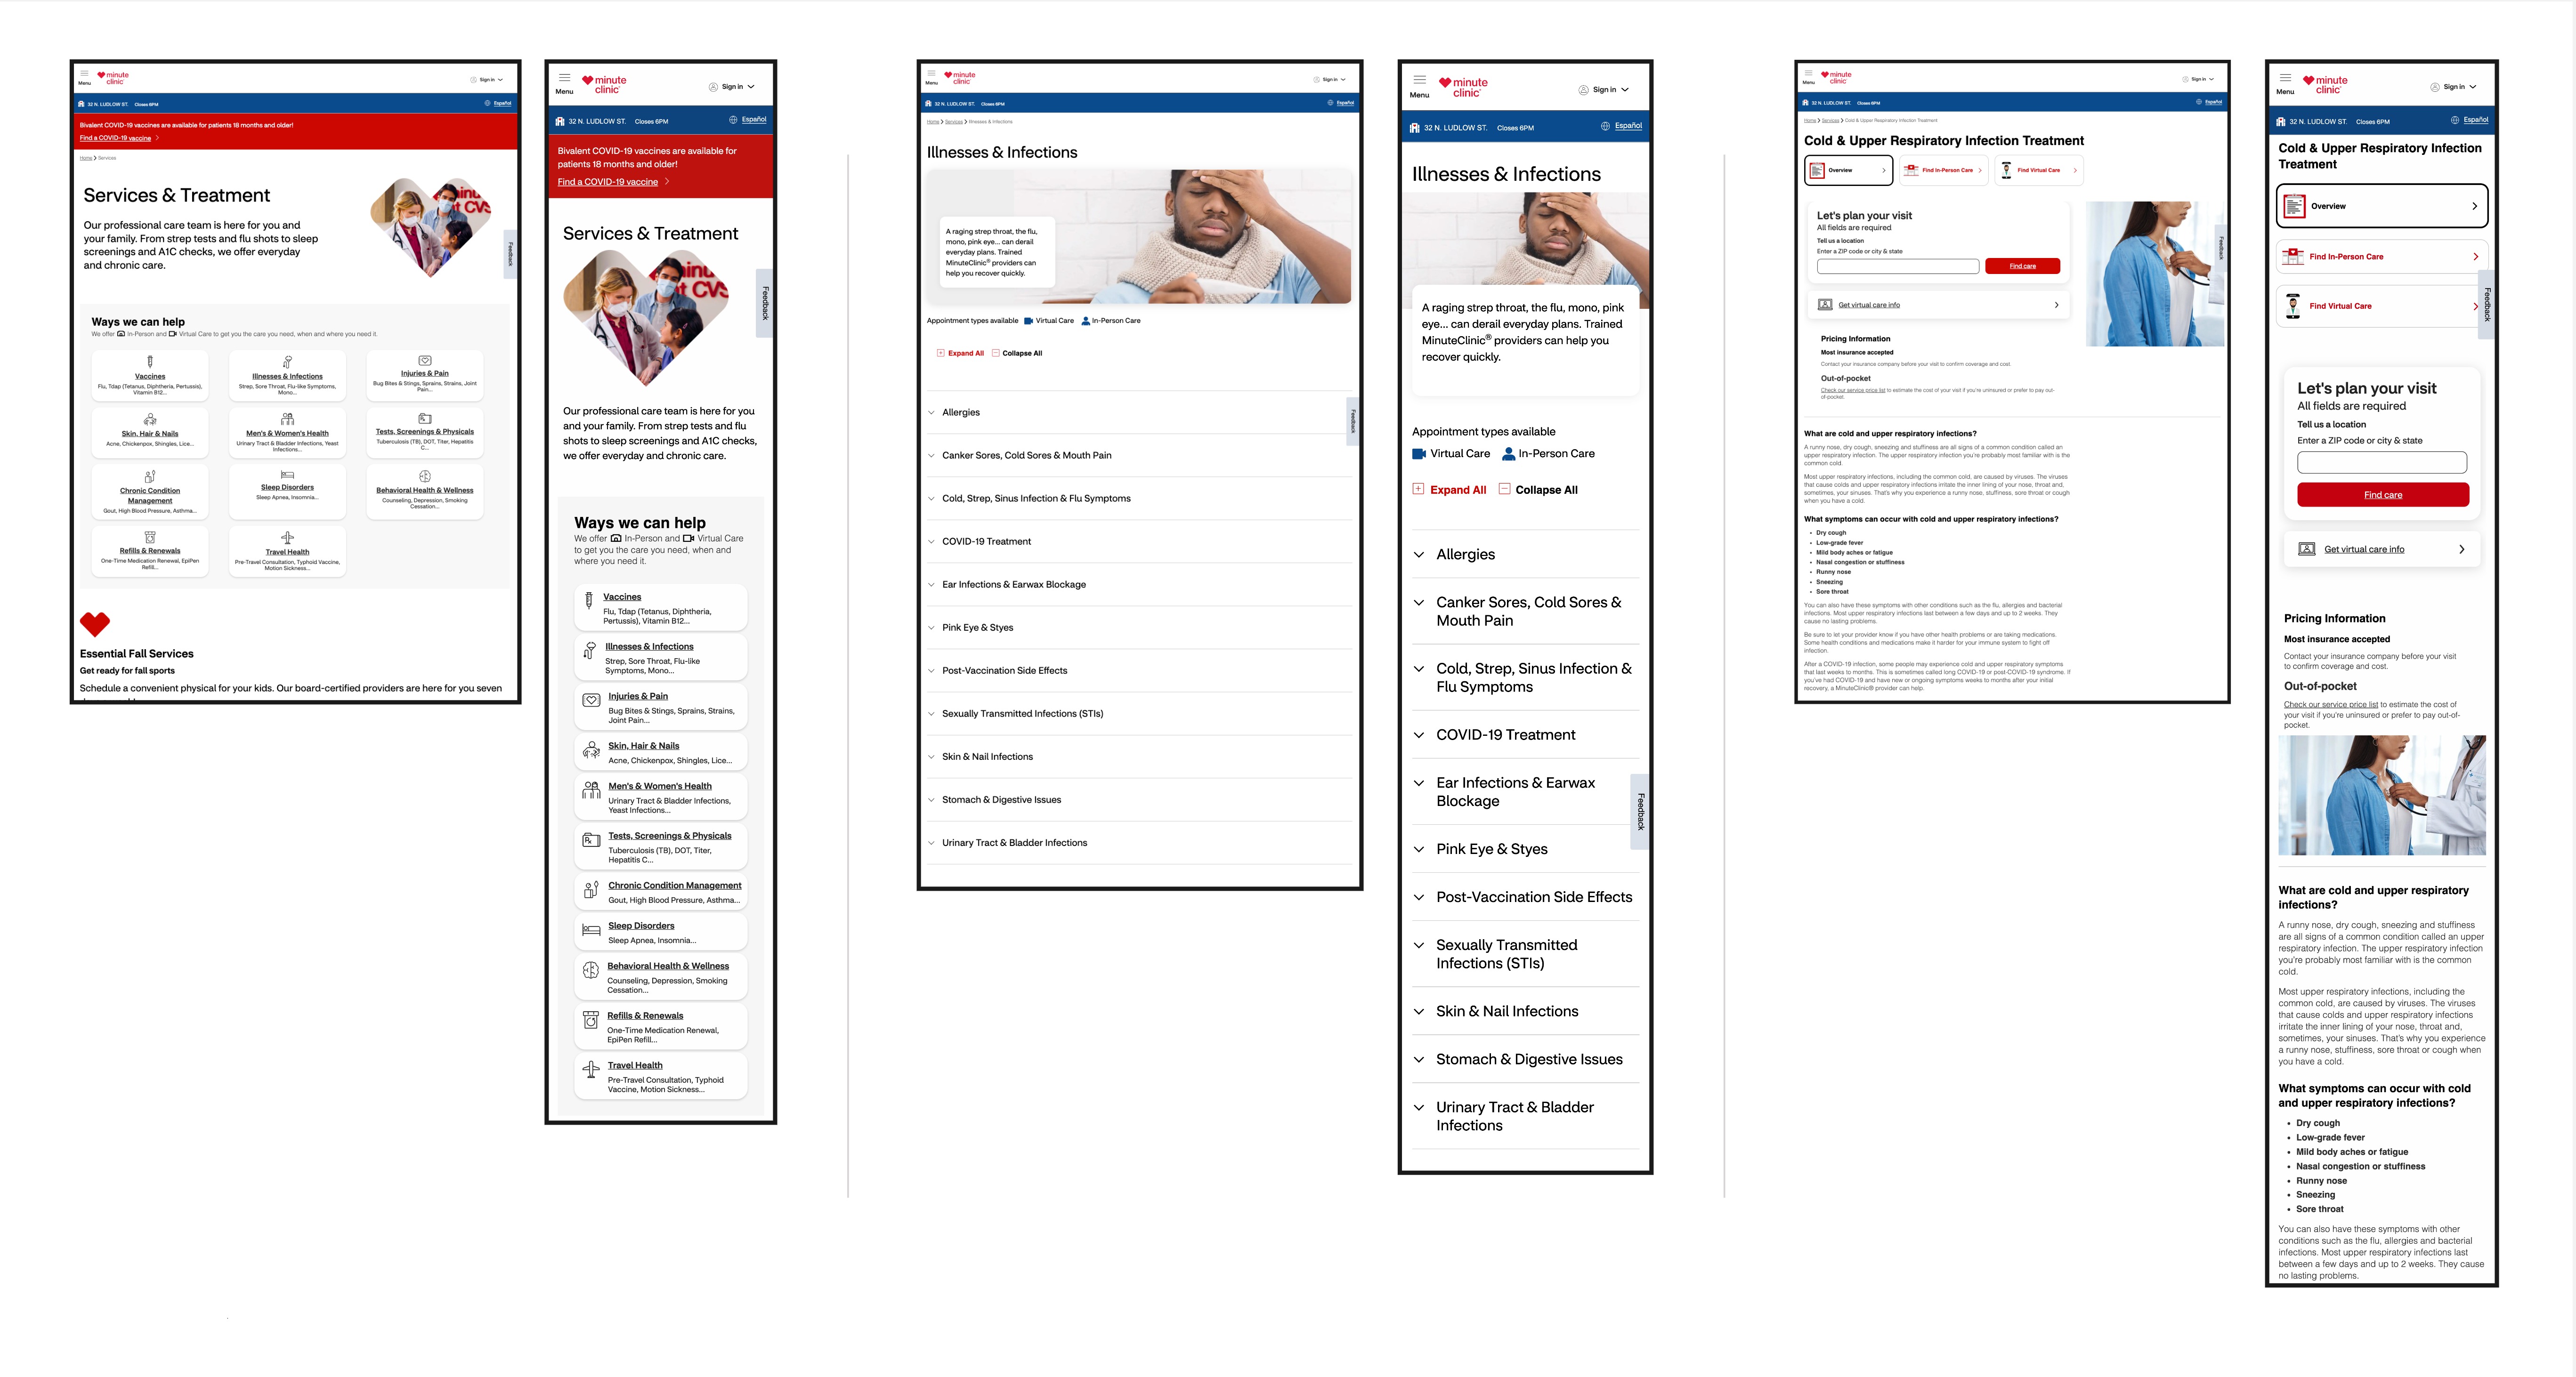 3 Clinical Services screens - Categories Summary Pages to Details on Services (Desktop & Mobile)